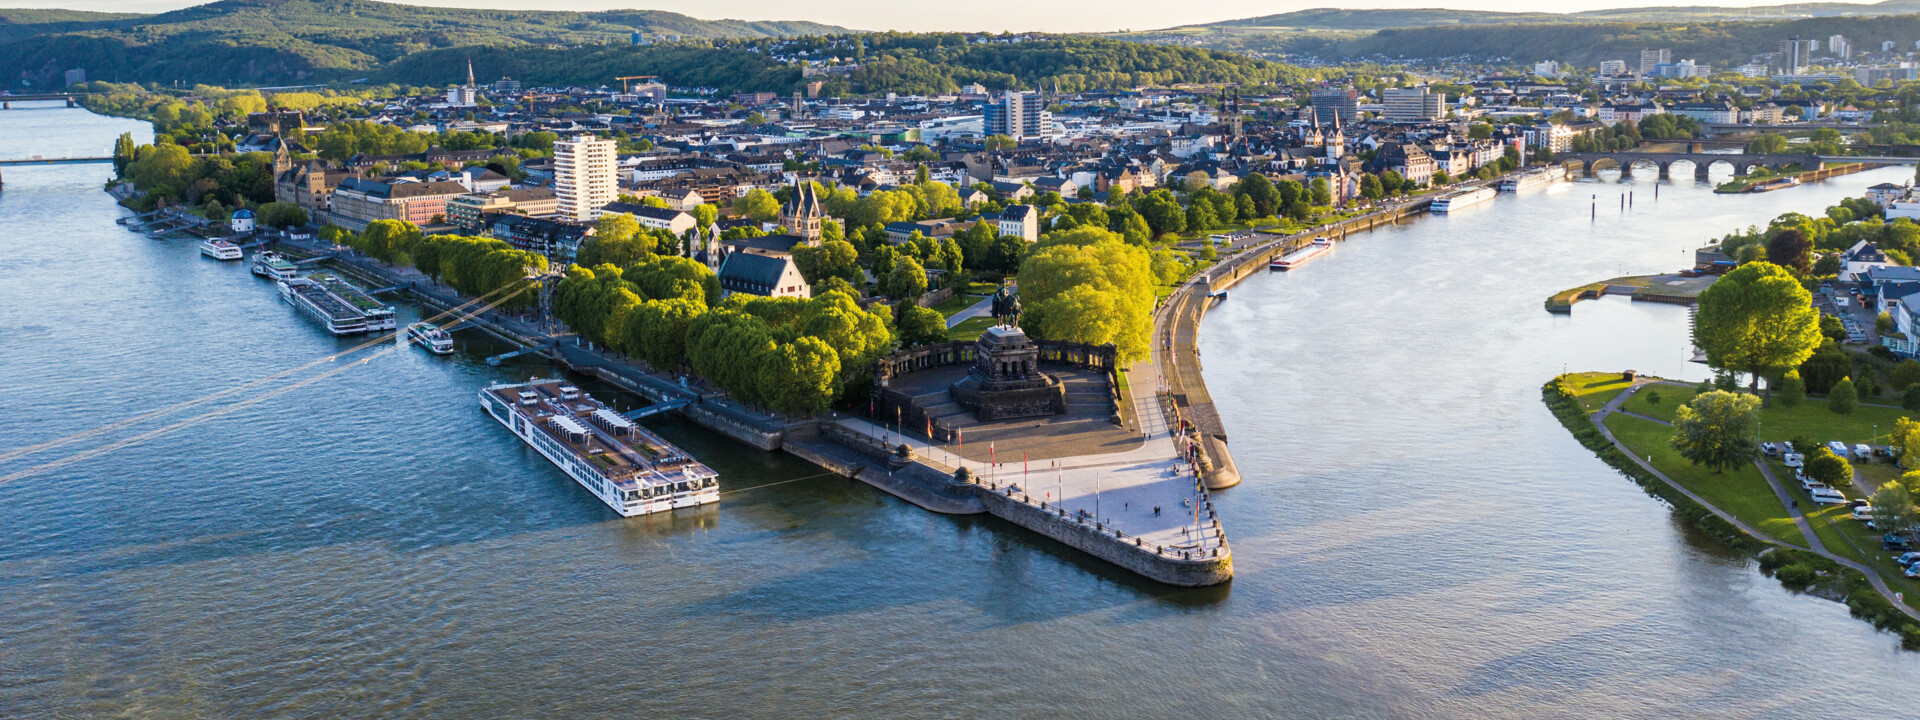 Aerial view of Deutsches Eck in Koblenz with Cable Car, Rhine, Moselle and boats in the foreground ©Koblenz-Touristik GmbH, Dominik Ketz